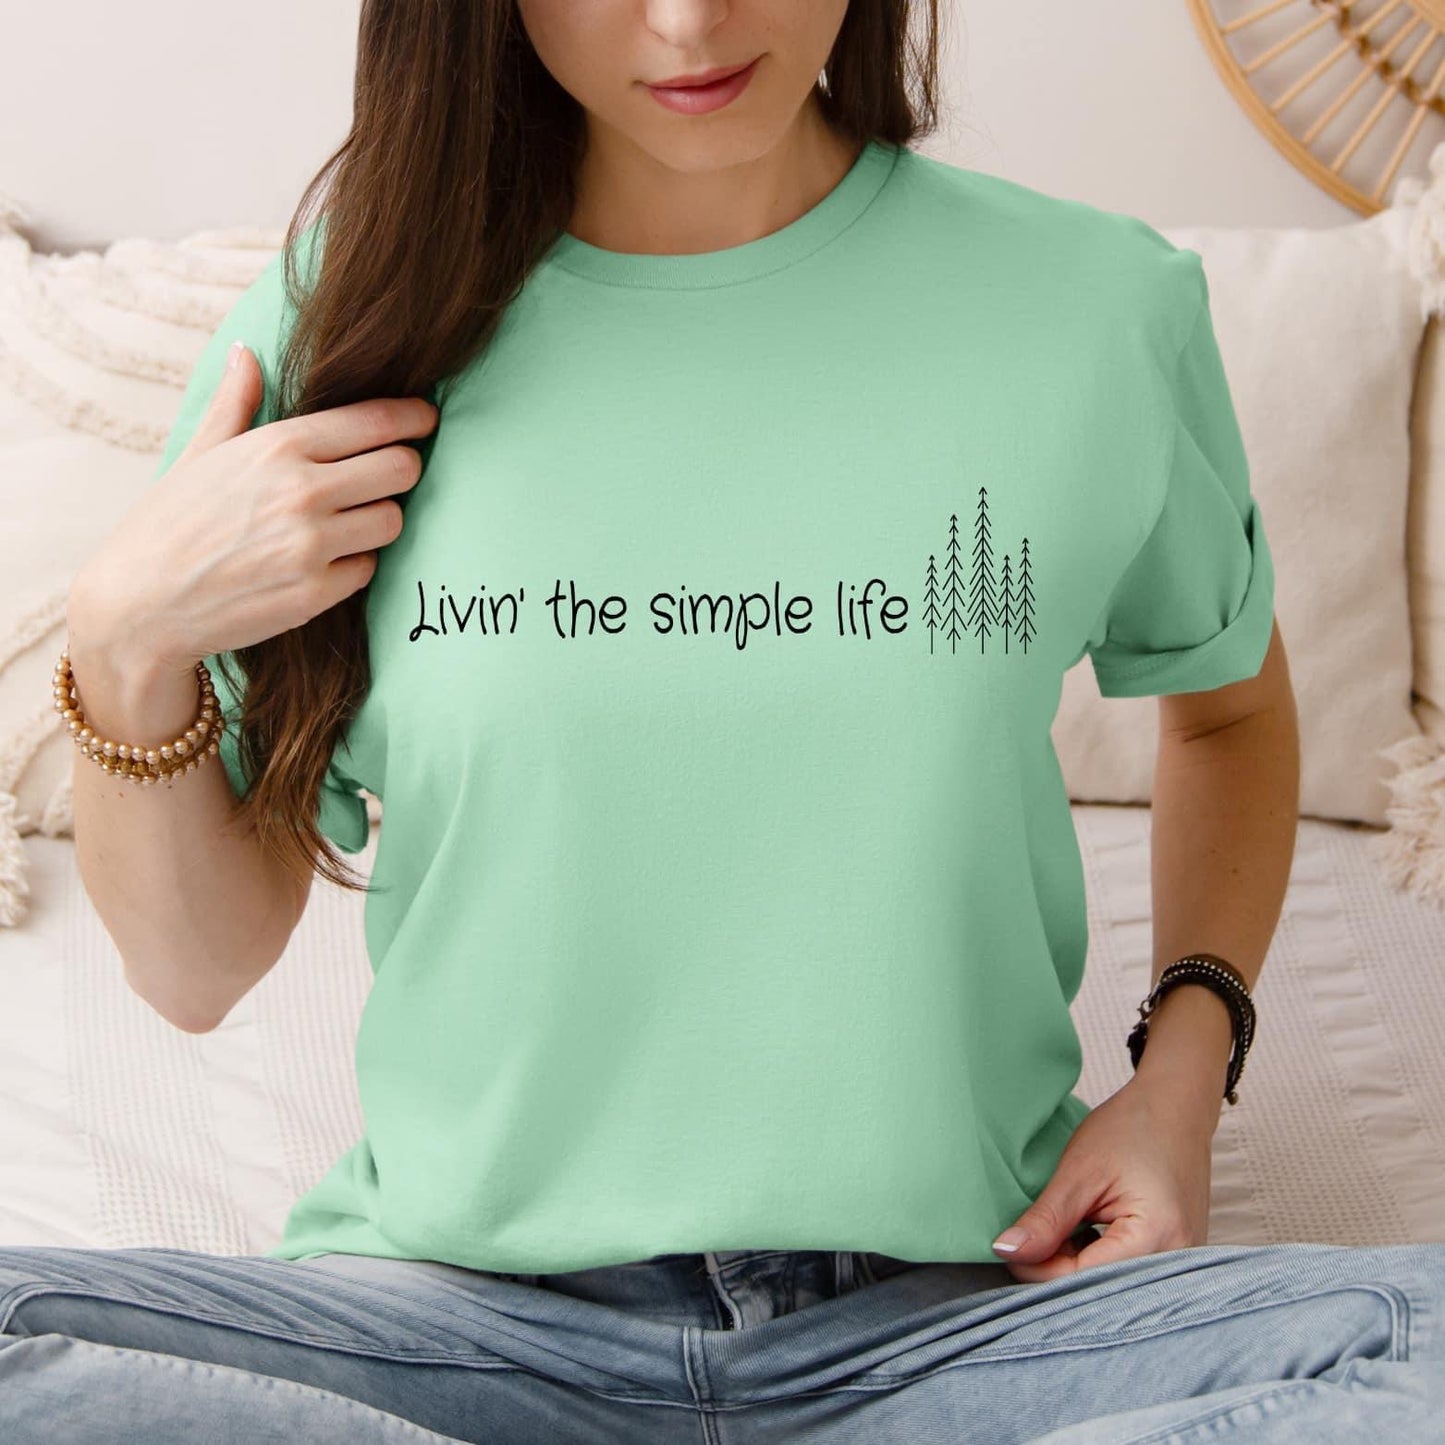 Living The Simple Life - SINGLE COLOR - Screen Print Transfer